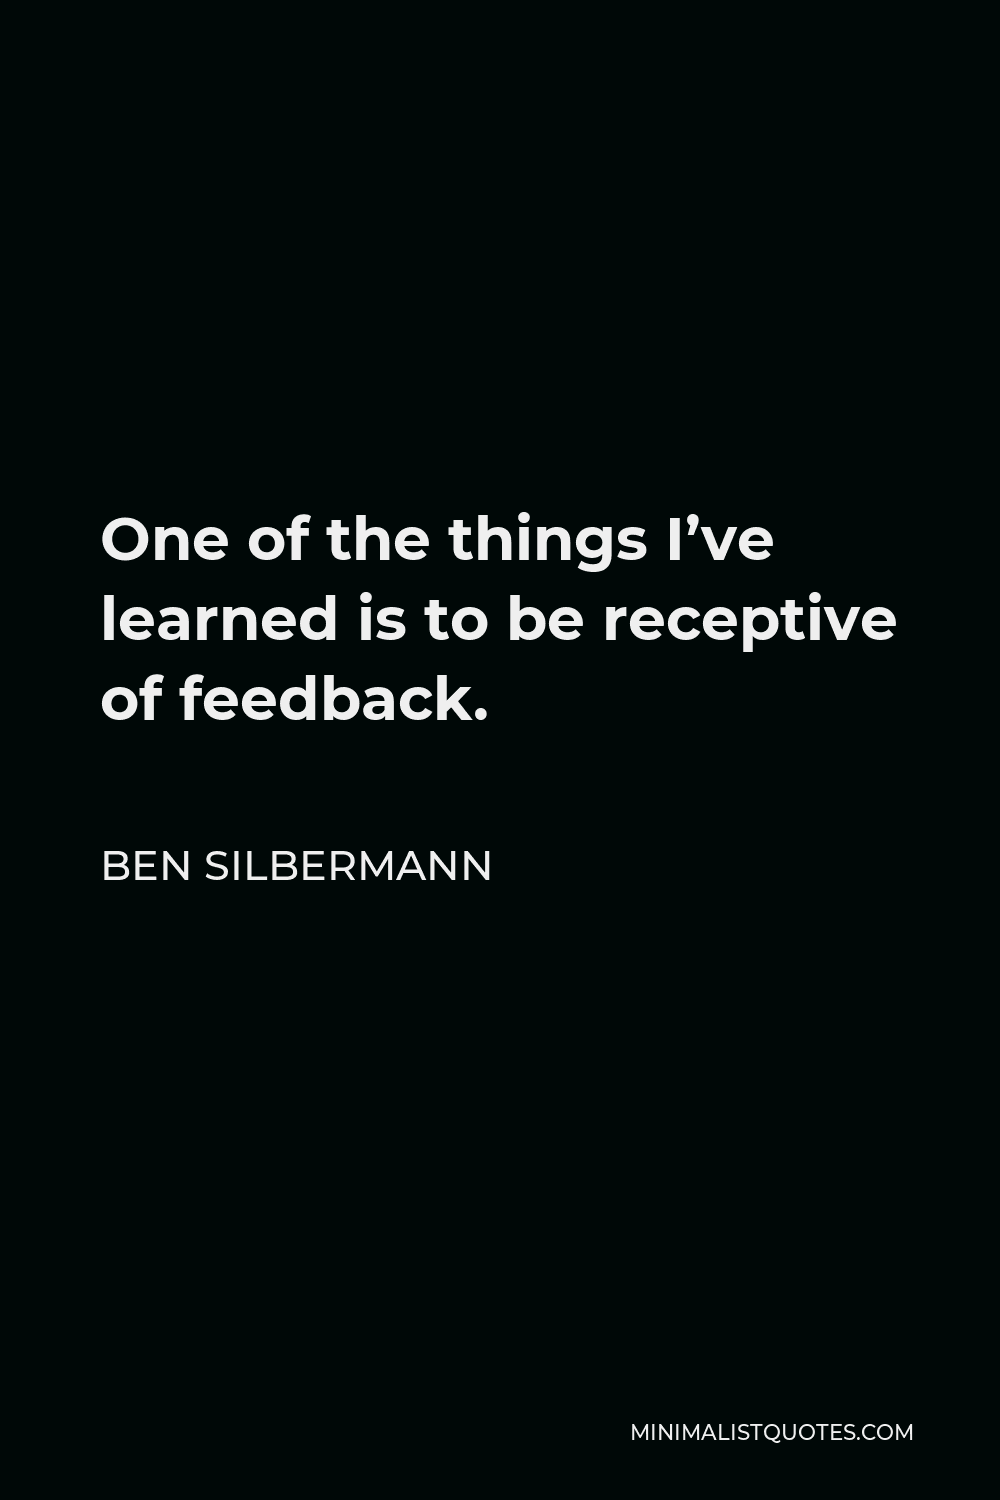 Ben Silbermann Quote - One of the things I’ve learned is to be receptive of feedback.